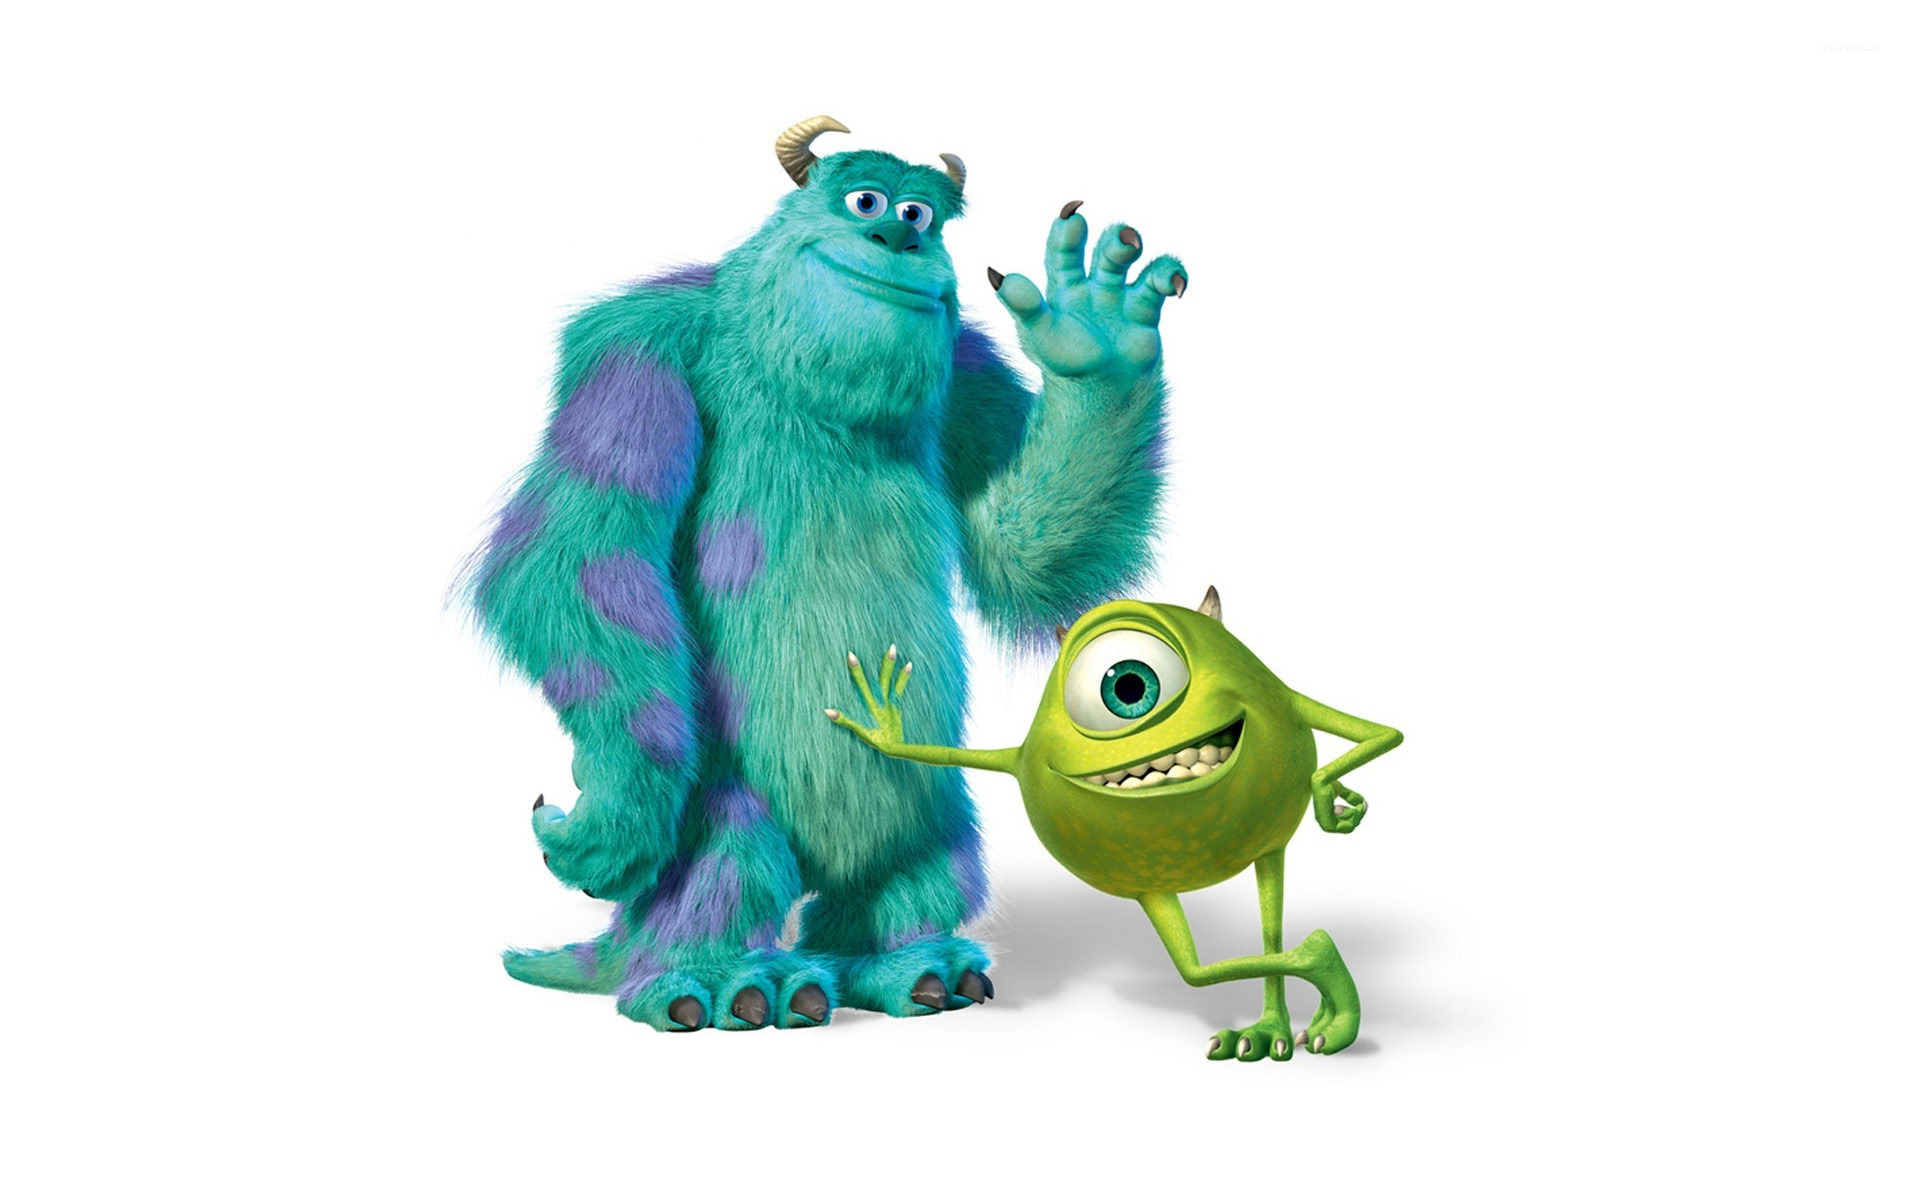 Monsters Inc Sully Mike - HD Wallpaper 